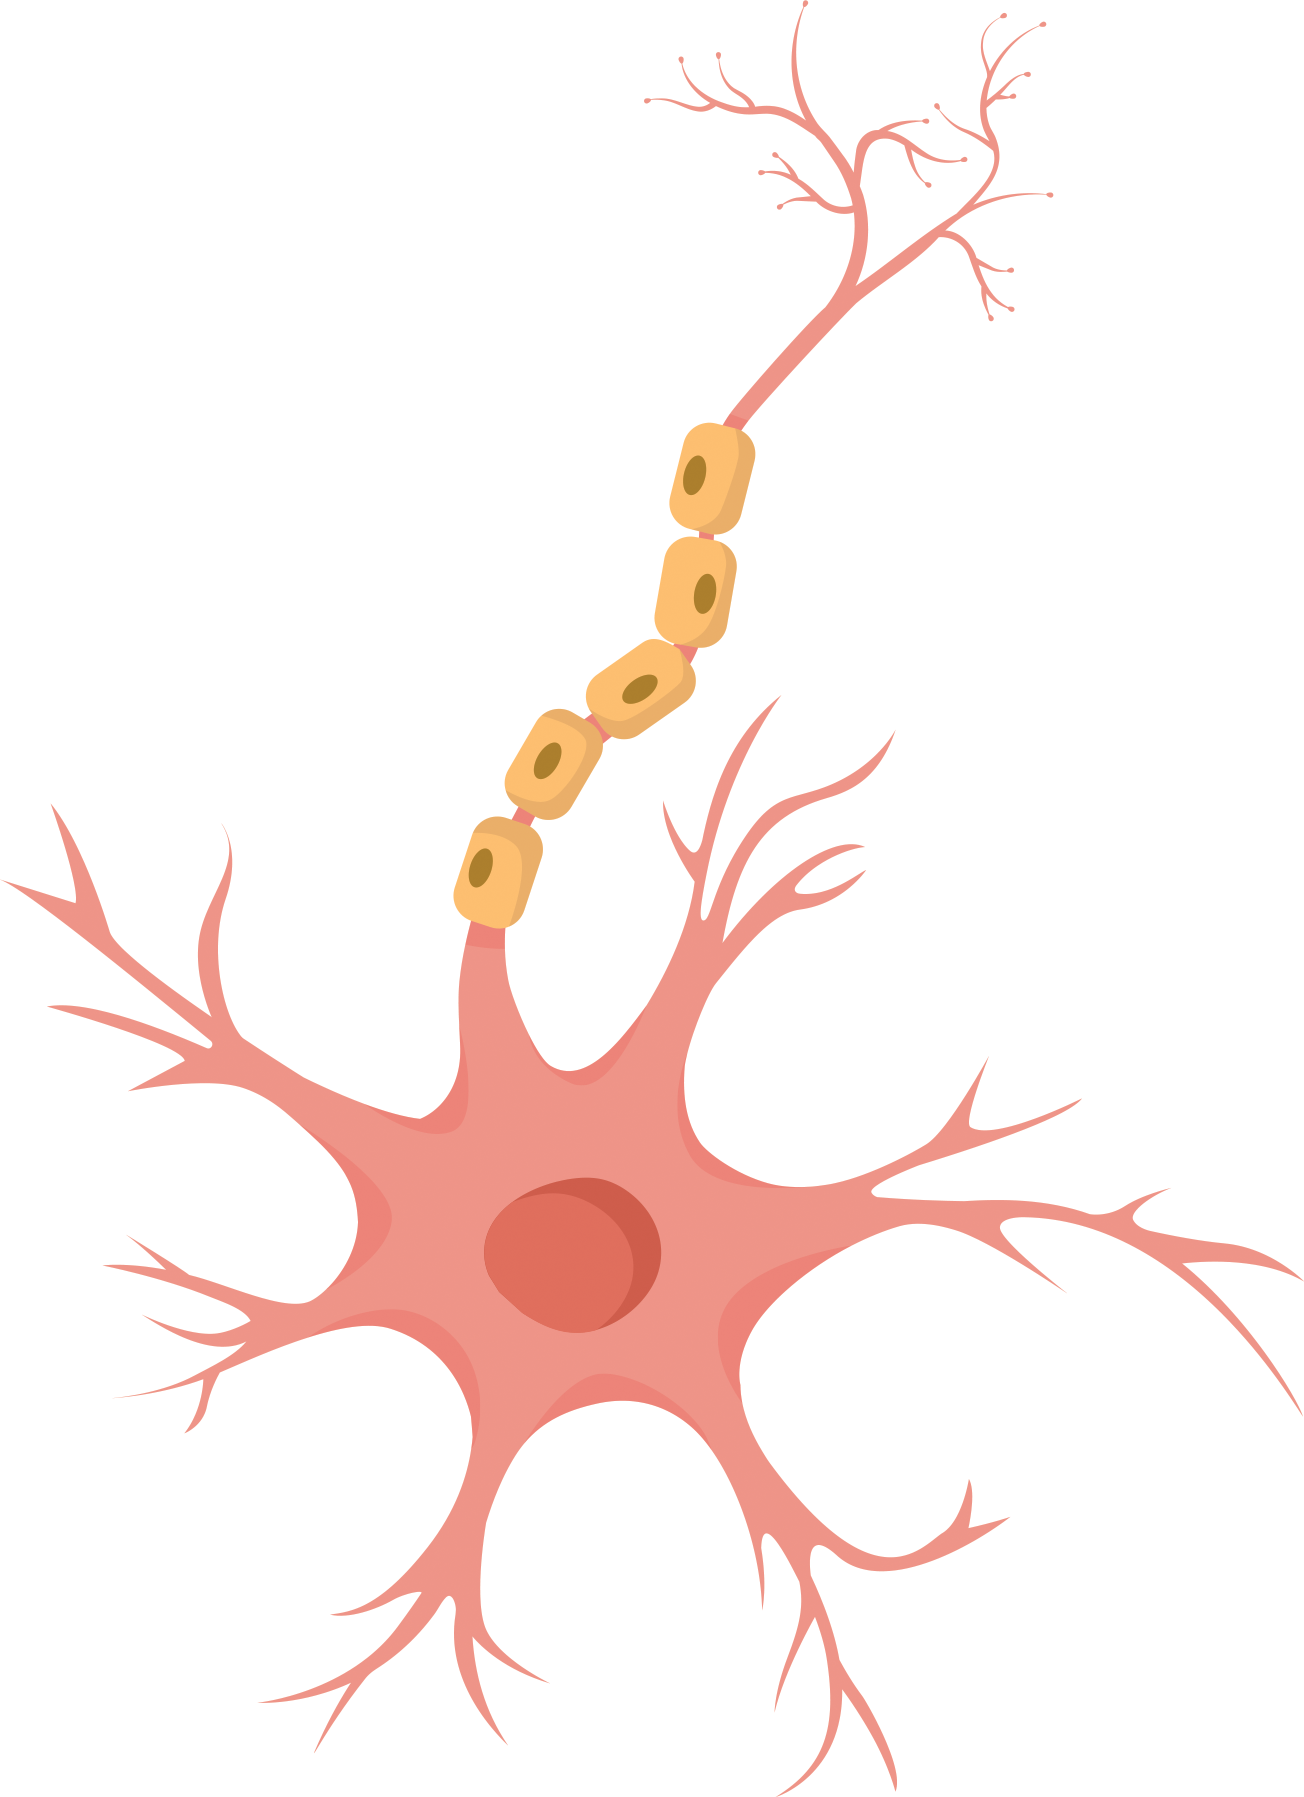 drawing of a neuron